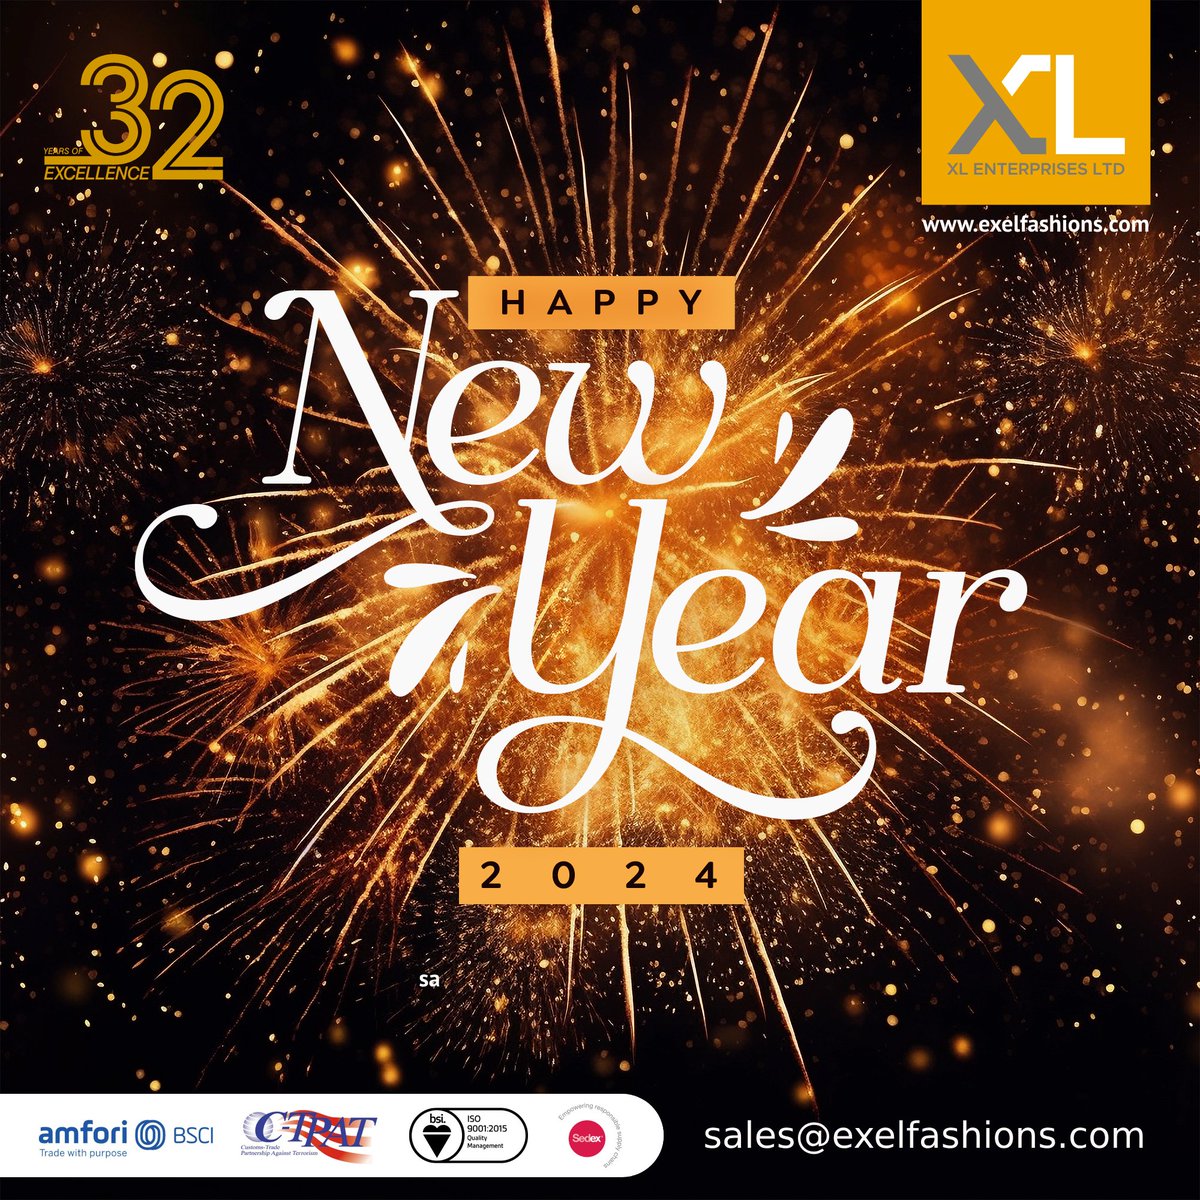 Wishing you and all of your loved ones health and happiness in the new year.

#happynewyear2024
#genuineleather #luxuryleathergoods #ManufacturerPrice #manufacturingexcellence #manufacturingunit